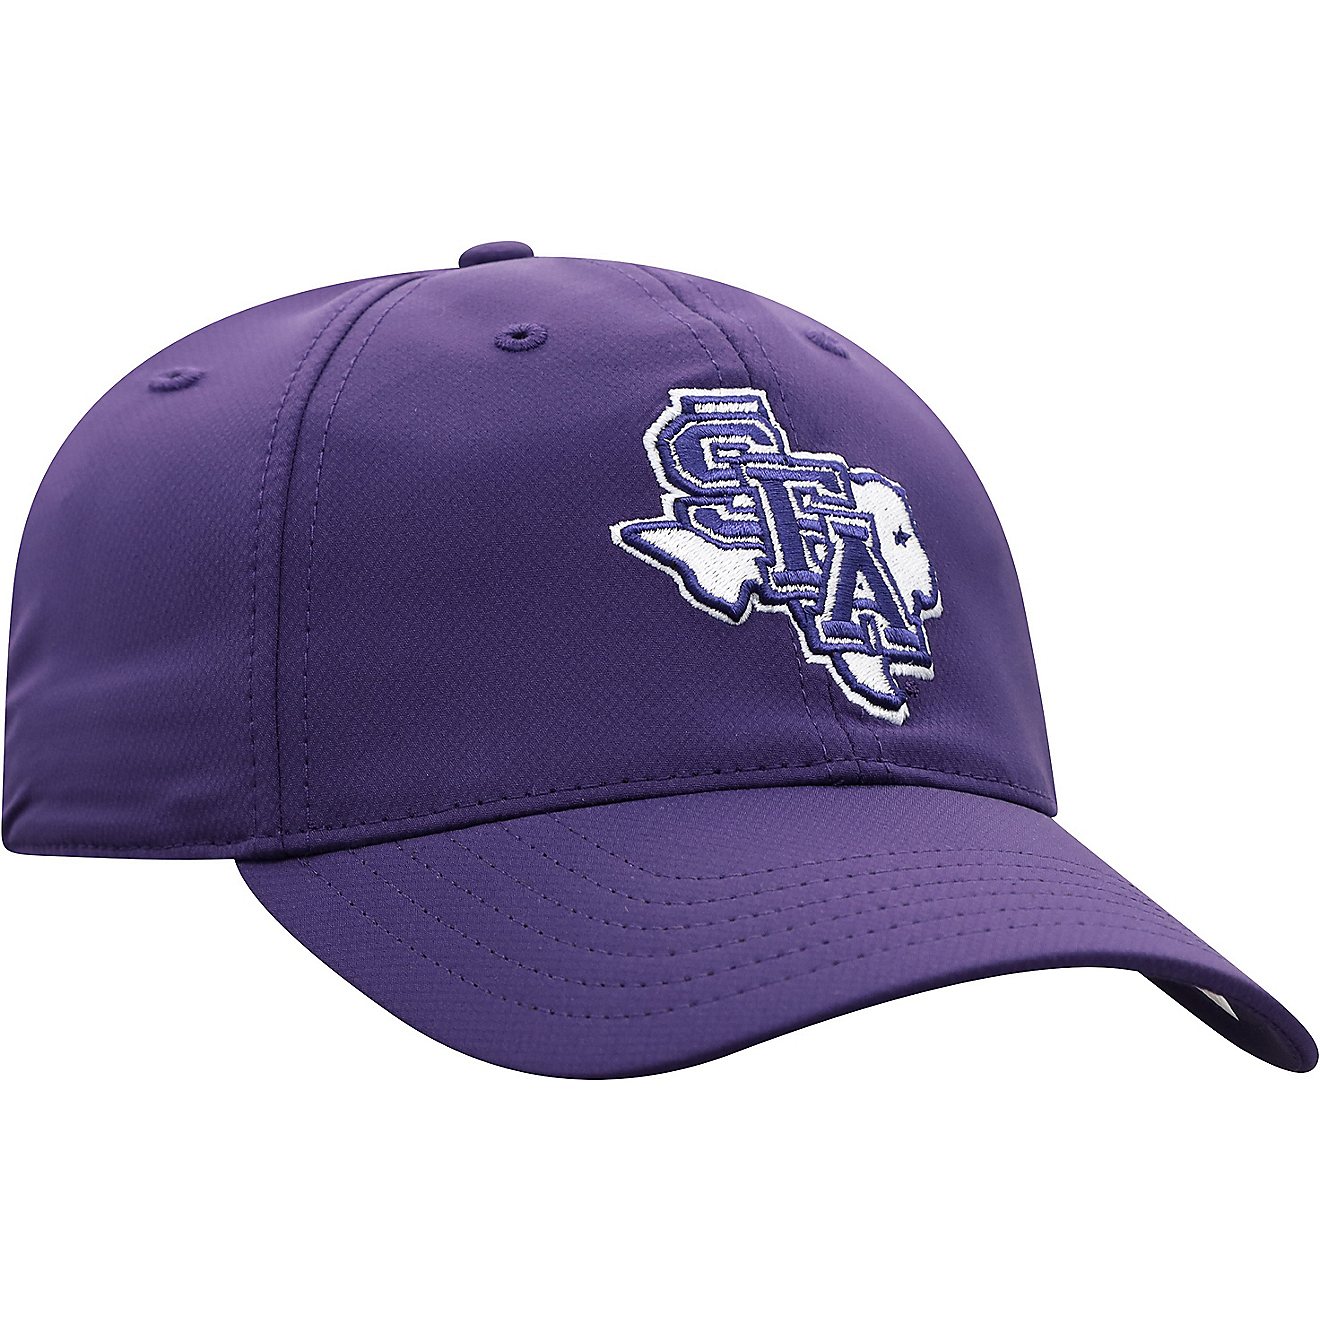 Top of the World Adults' Stephen F. Austin State University Trainer 20 Adjustable Team Color Cap                                 - view number 4